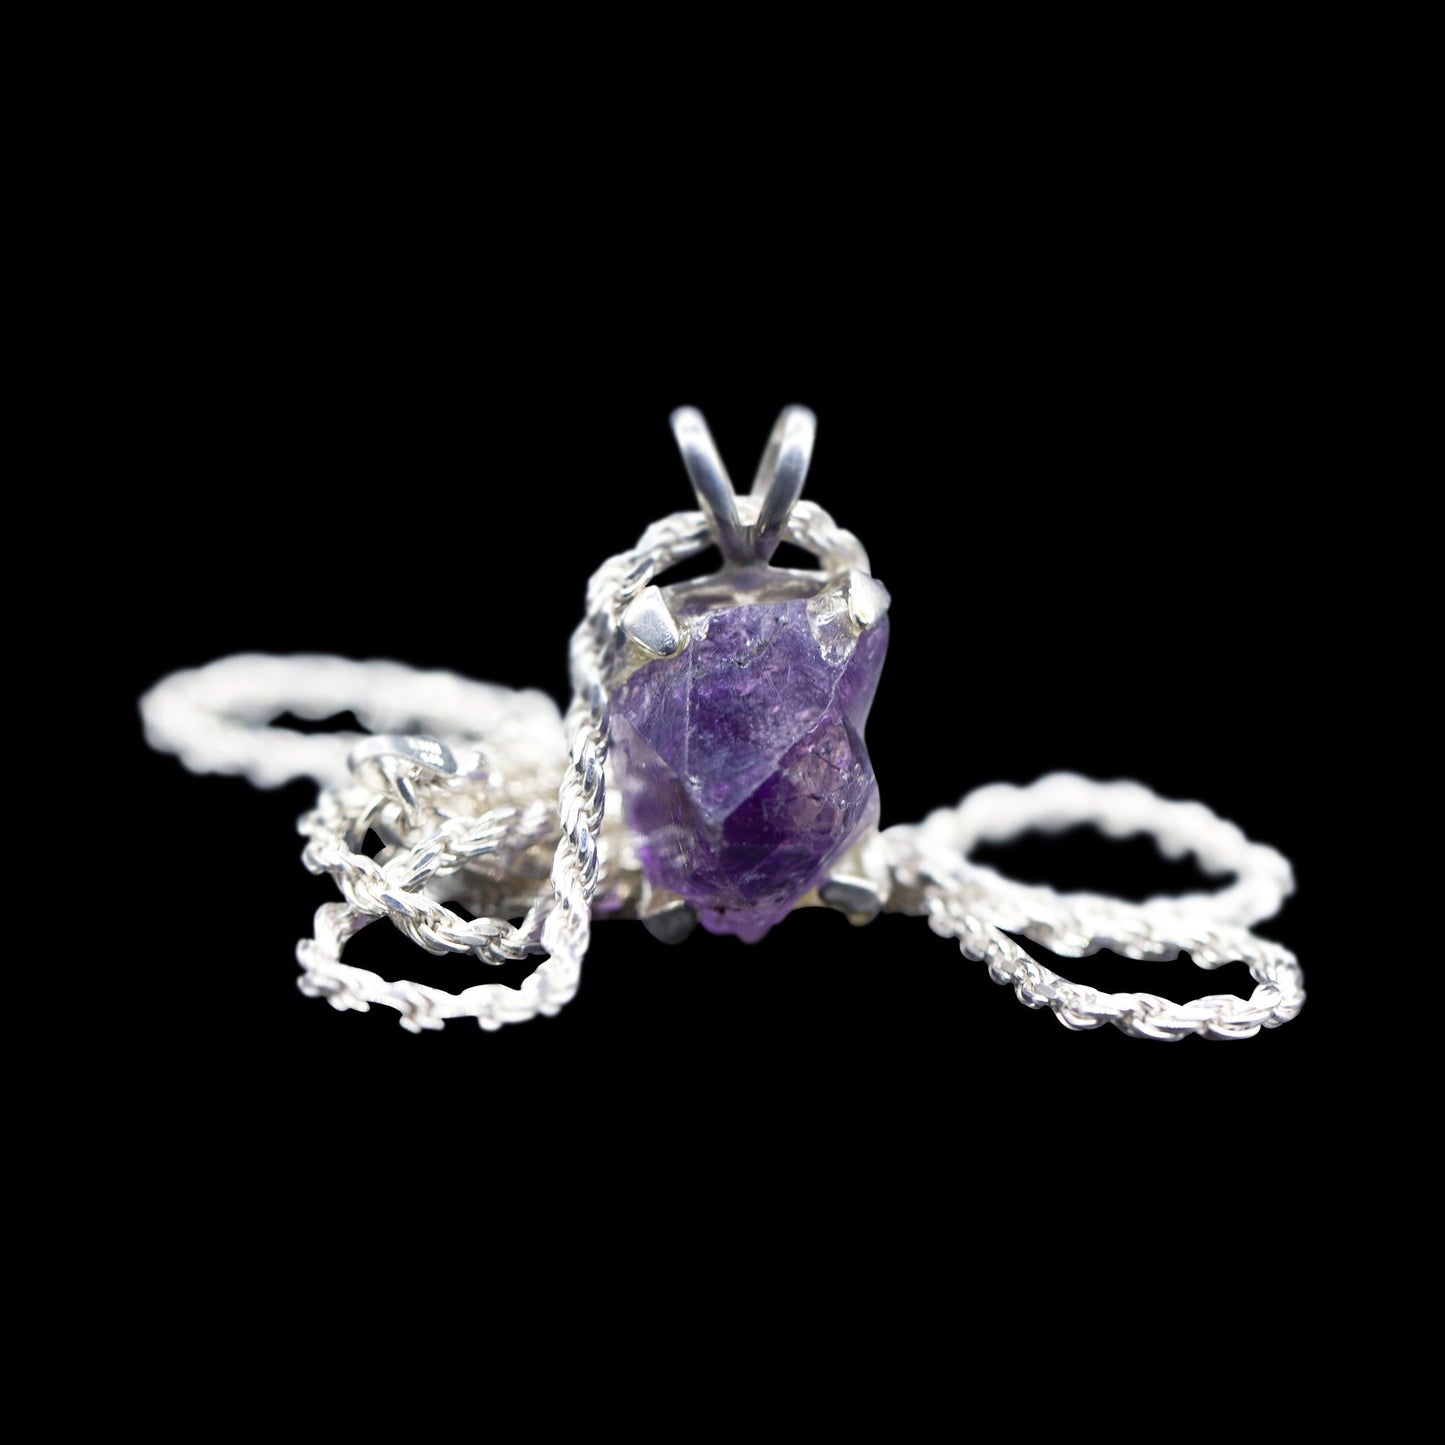 Raw Amethyst Nugget on Sterling Silver Rope